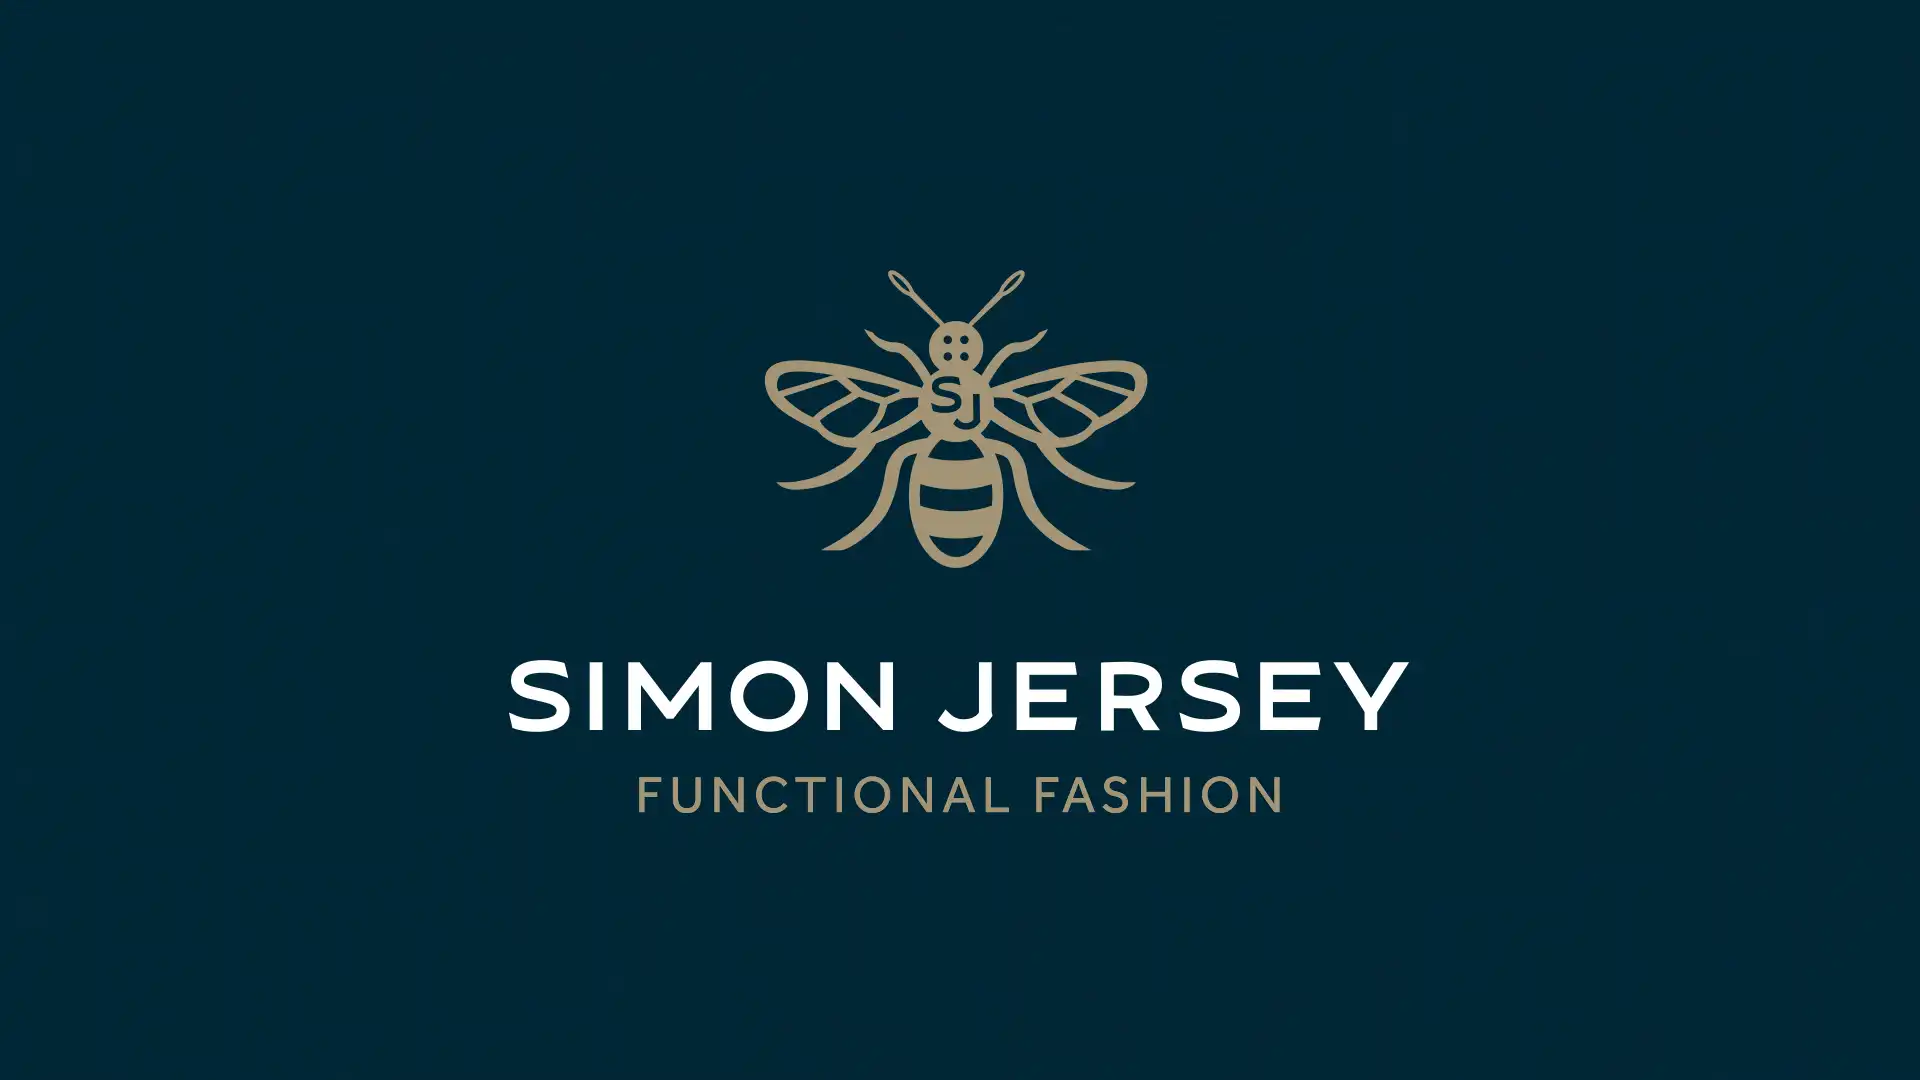 Use-Simon-Jersey-discount-code-NHS-to-get-20%-off